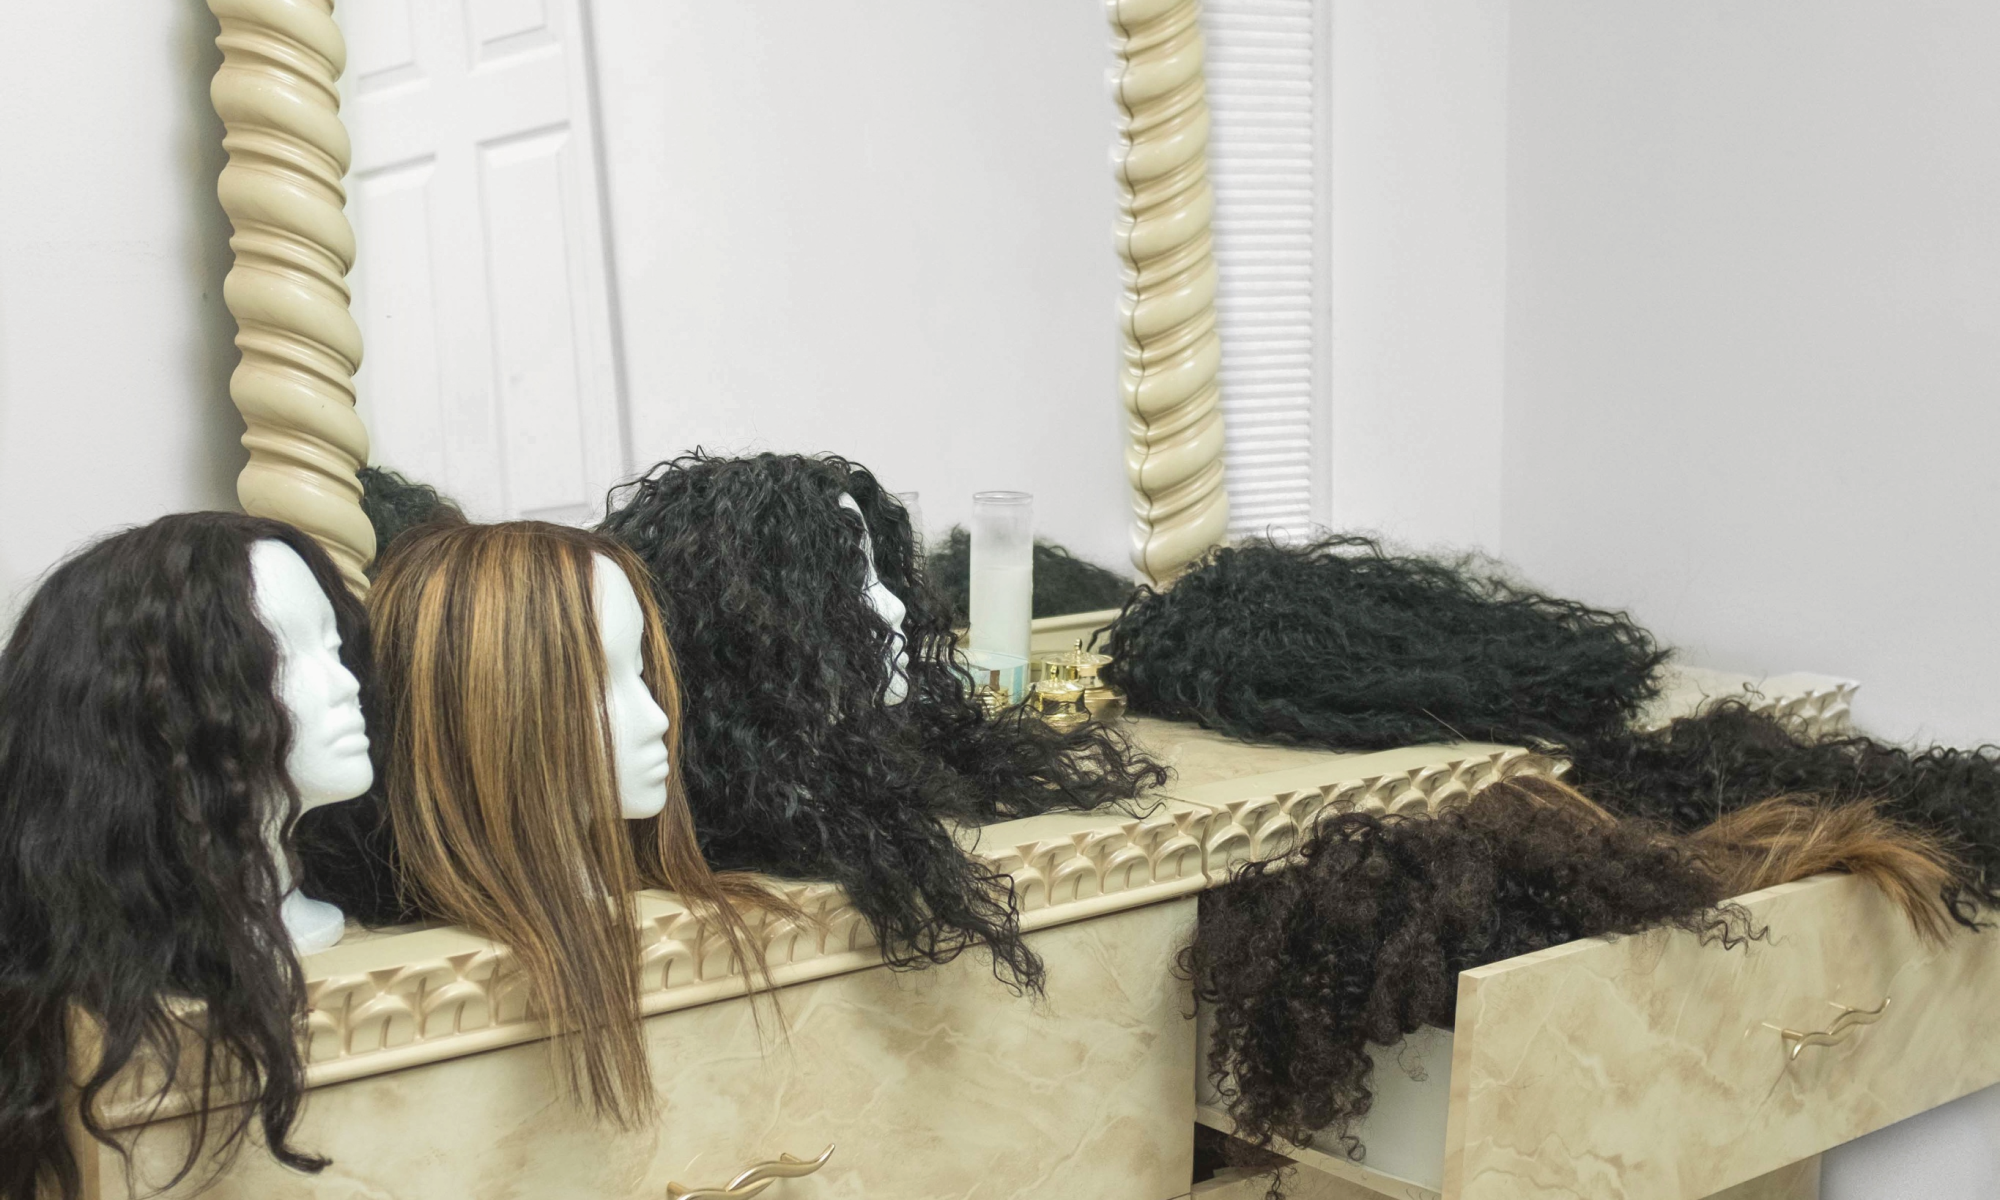 Multiple wig randomly laid out across the counter of a dresser.